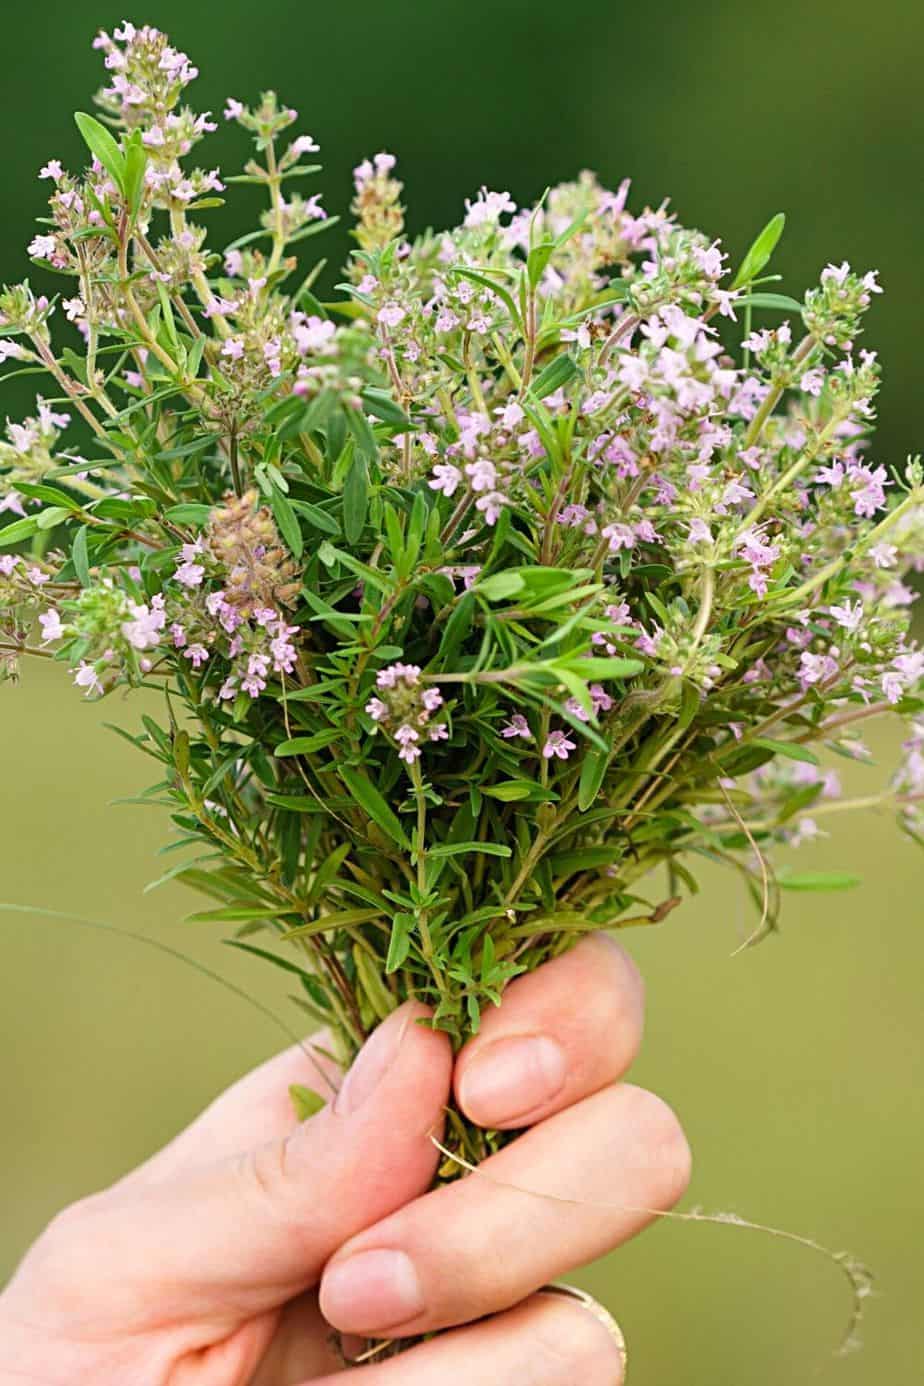 Thyme is another great addition to your south-facing balcony grown herbs